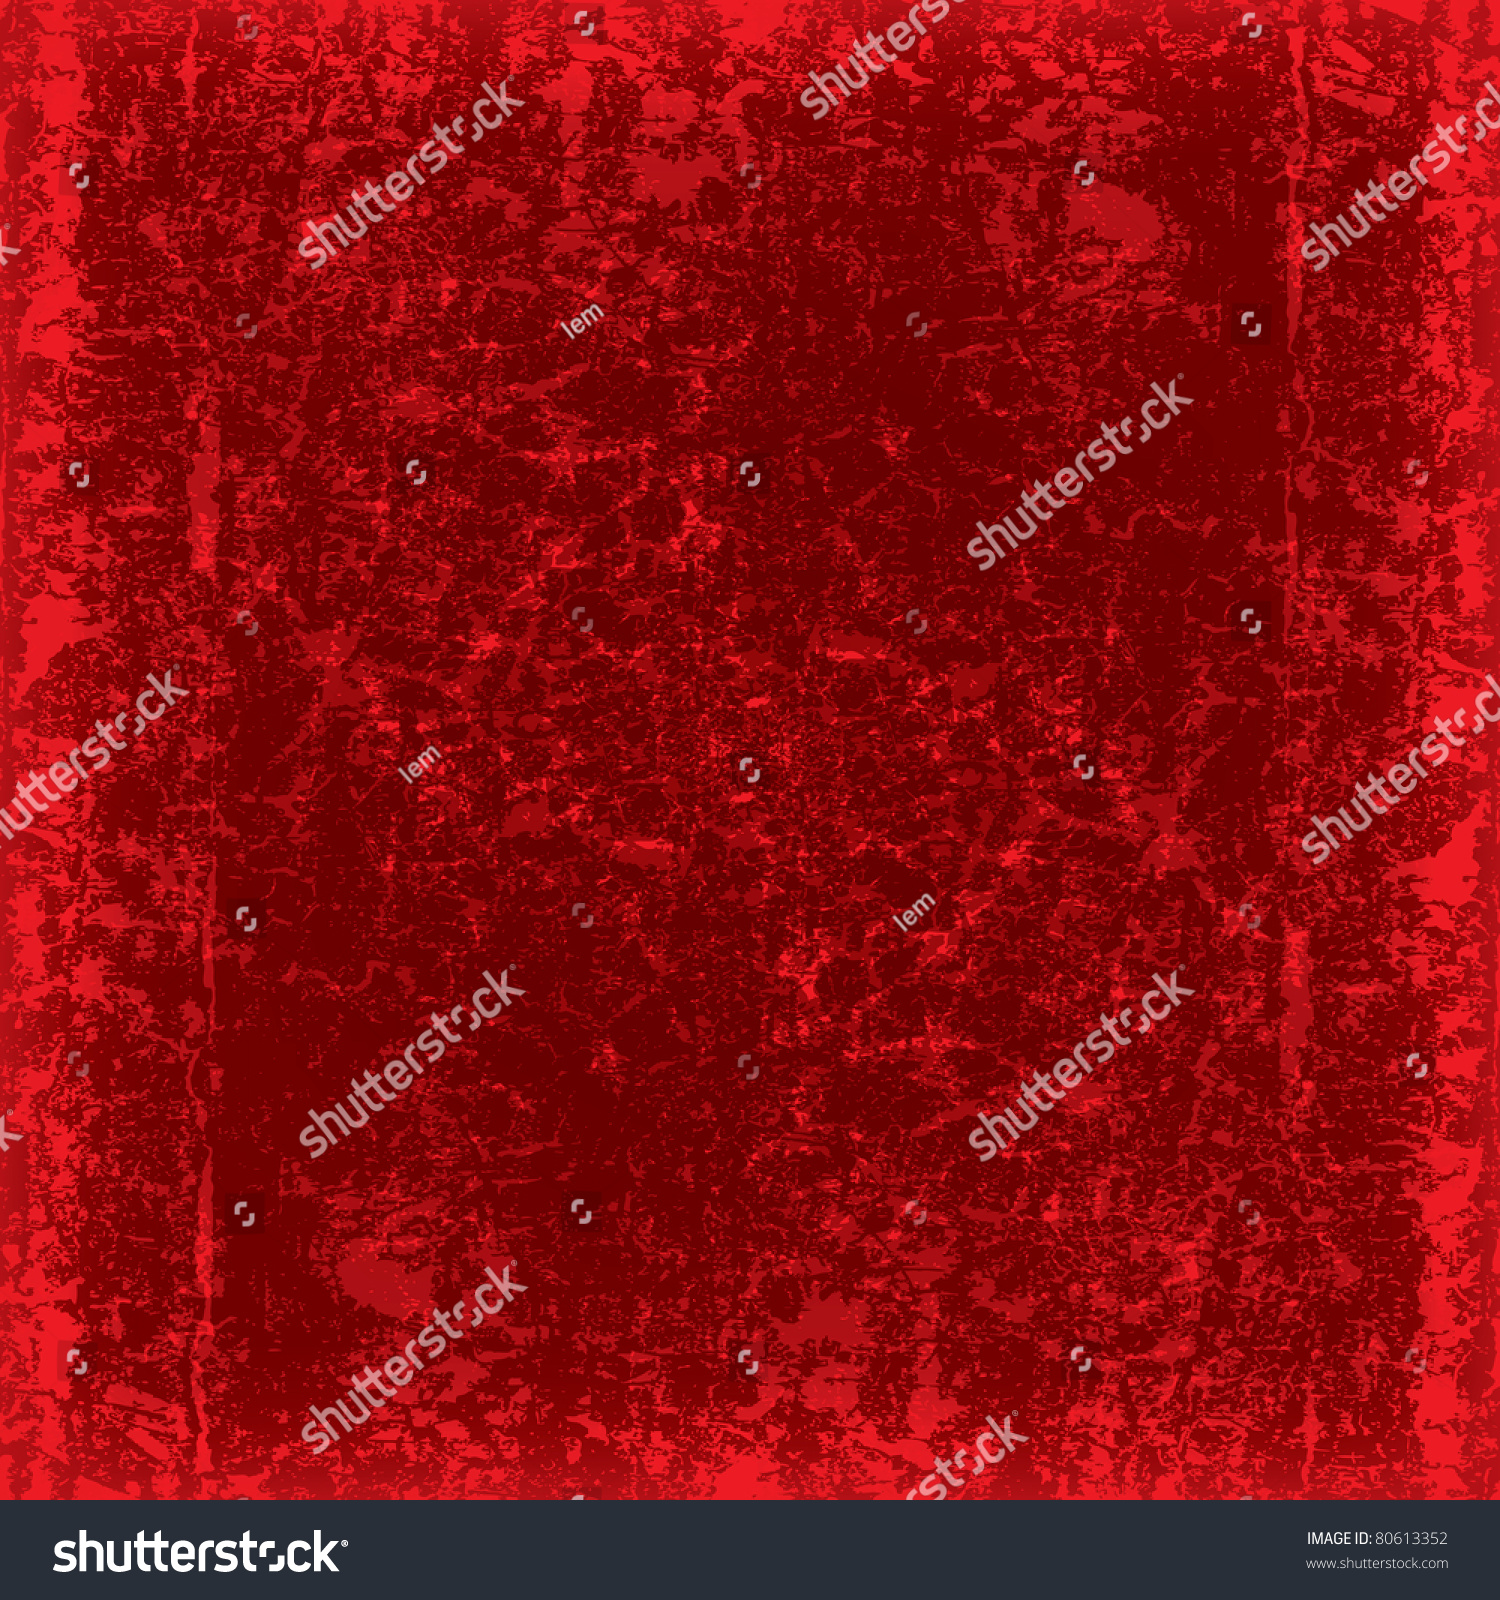 abstract grunge red background dirty wood plank #80613352